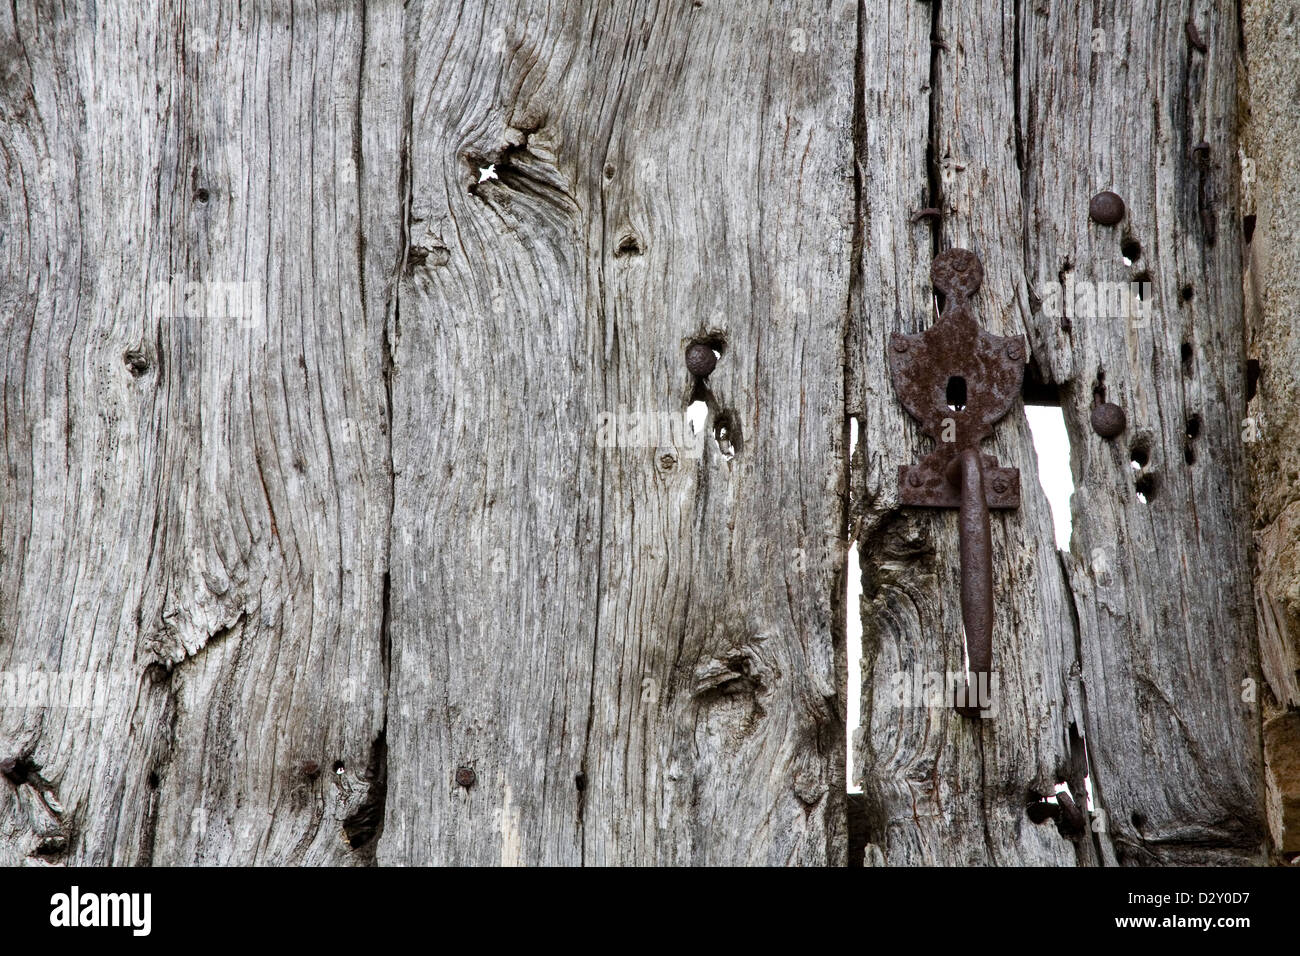 Old wooden door with metal lock and handle, it has bullet hole damage and the wood has turned silvery and cracked. Stock Photo